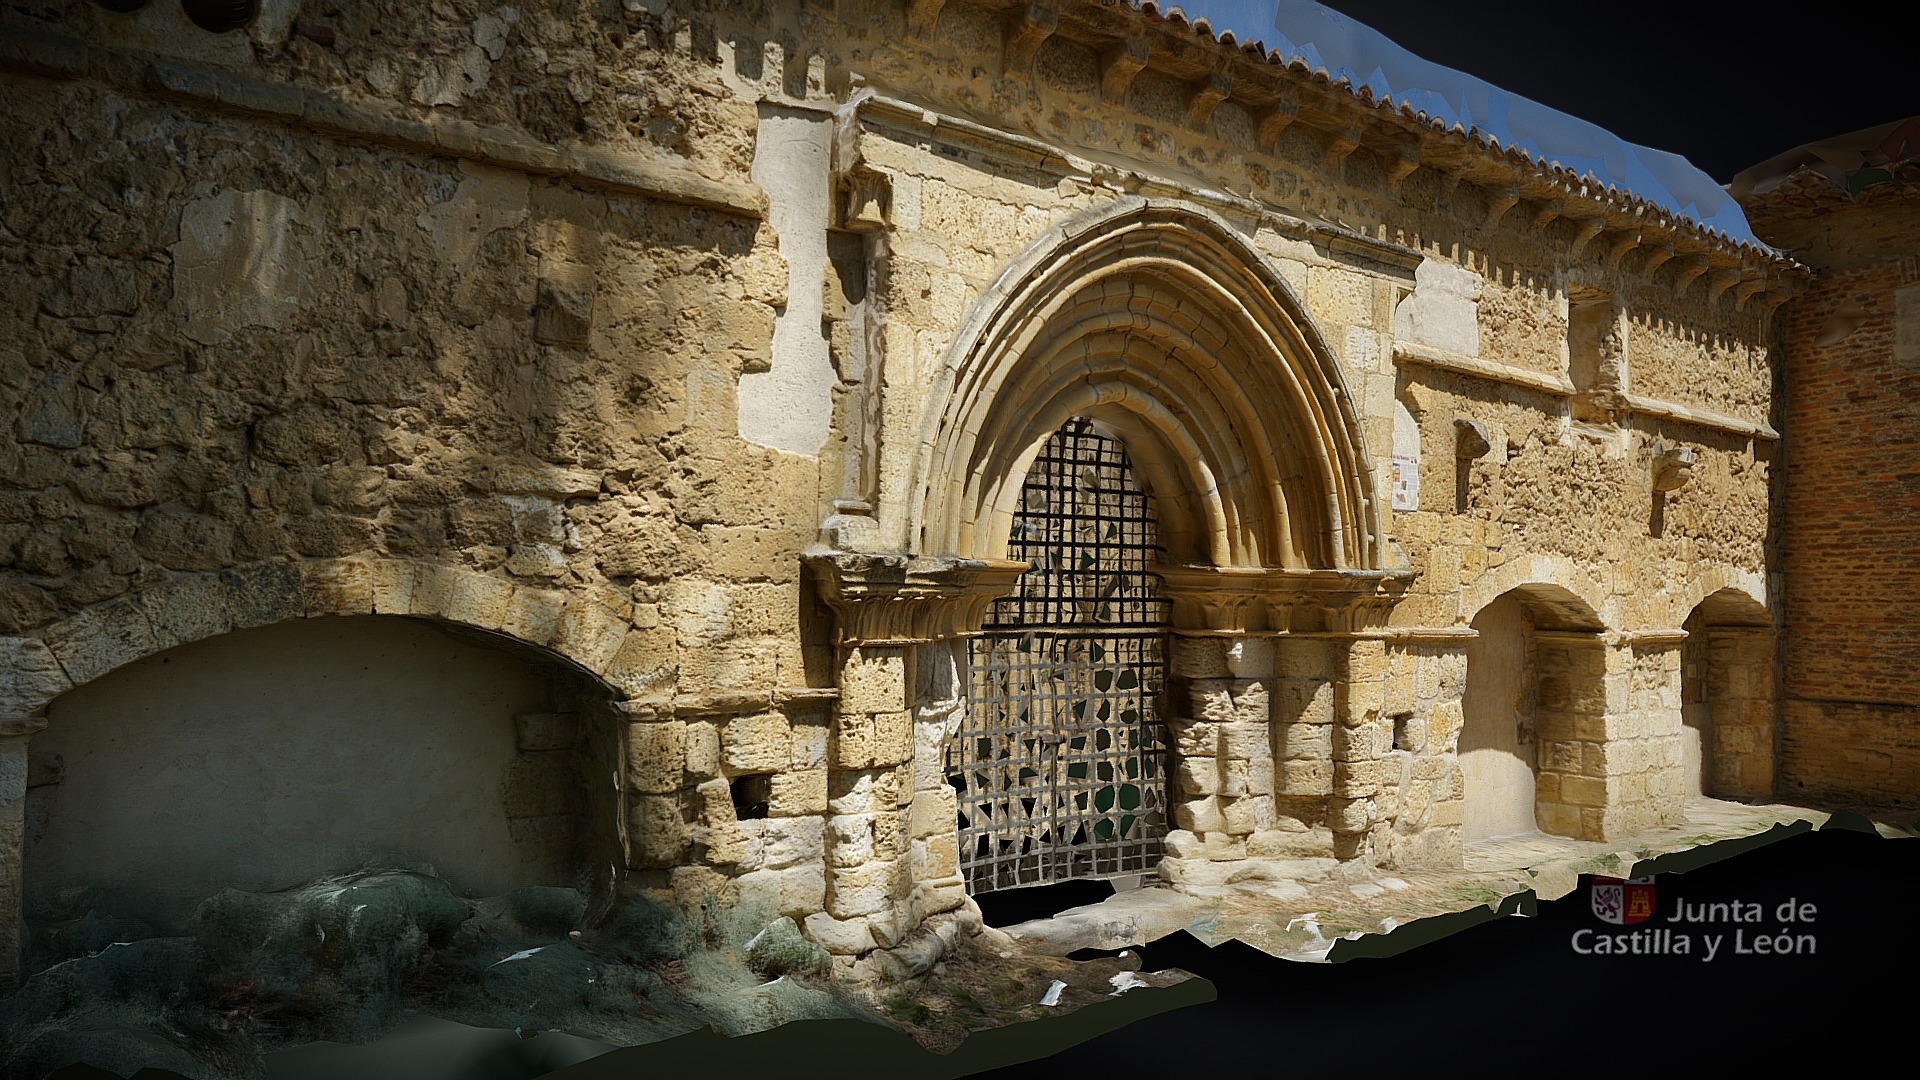 3D model San Salvador de Nogal – Exteriores - This is a 3D model of the San Salvador de Nogal - Exteriores. The 3D model is about a stone building with a large arched doorway.